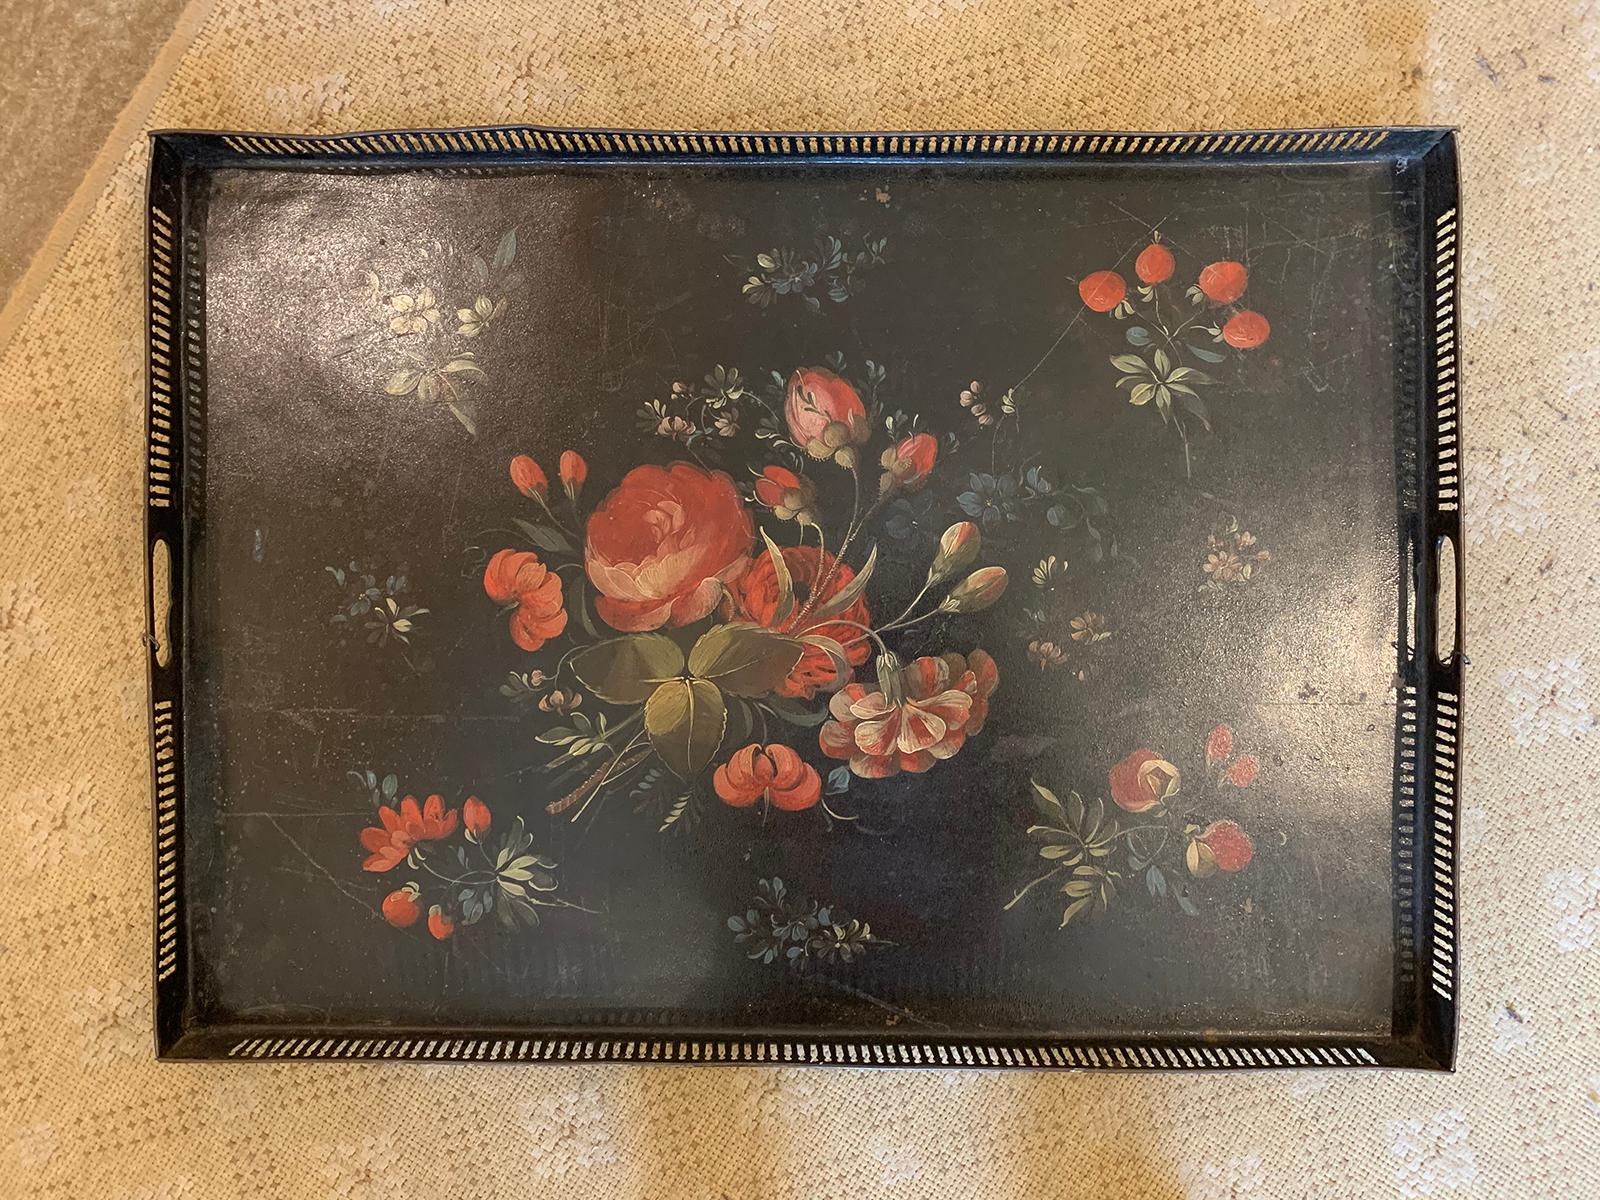 19th century circa 1810 painted floral tole tray with pierced edge.